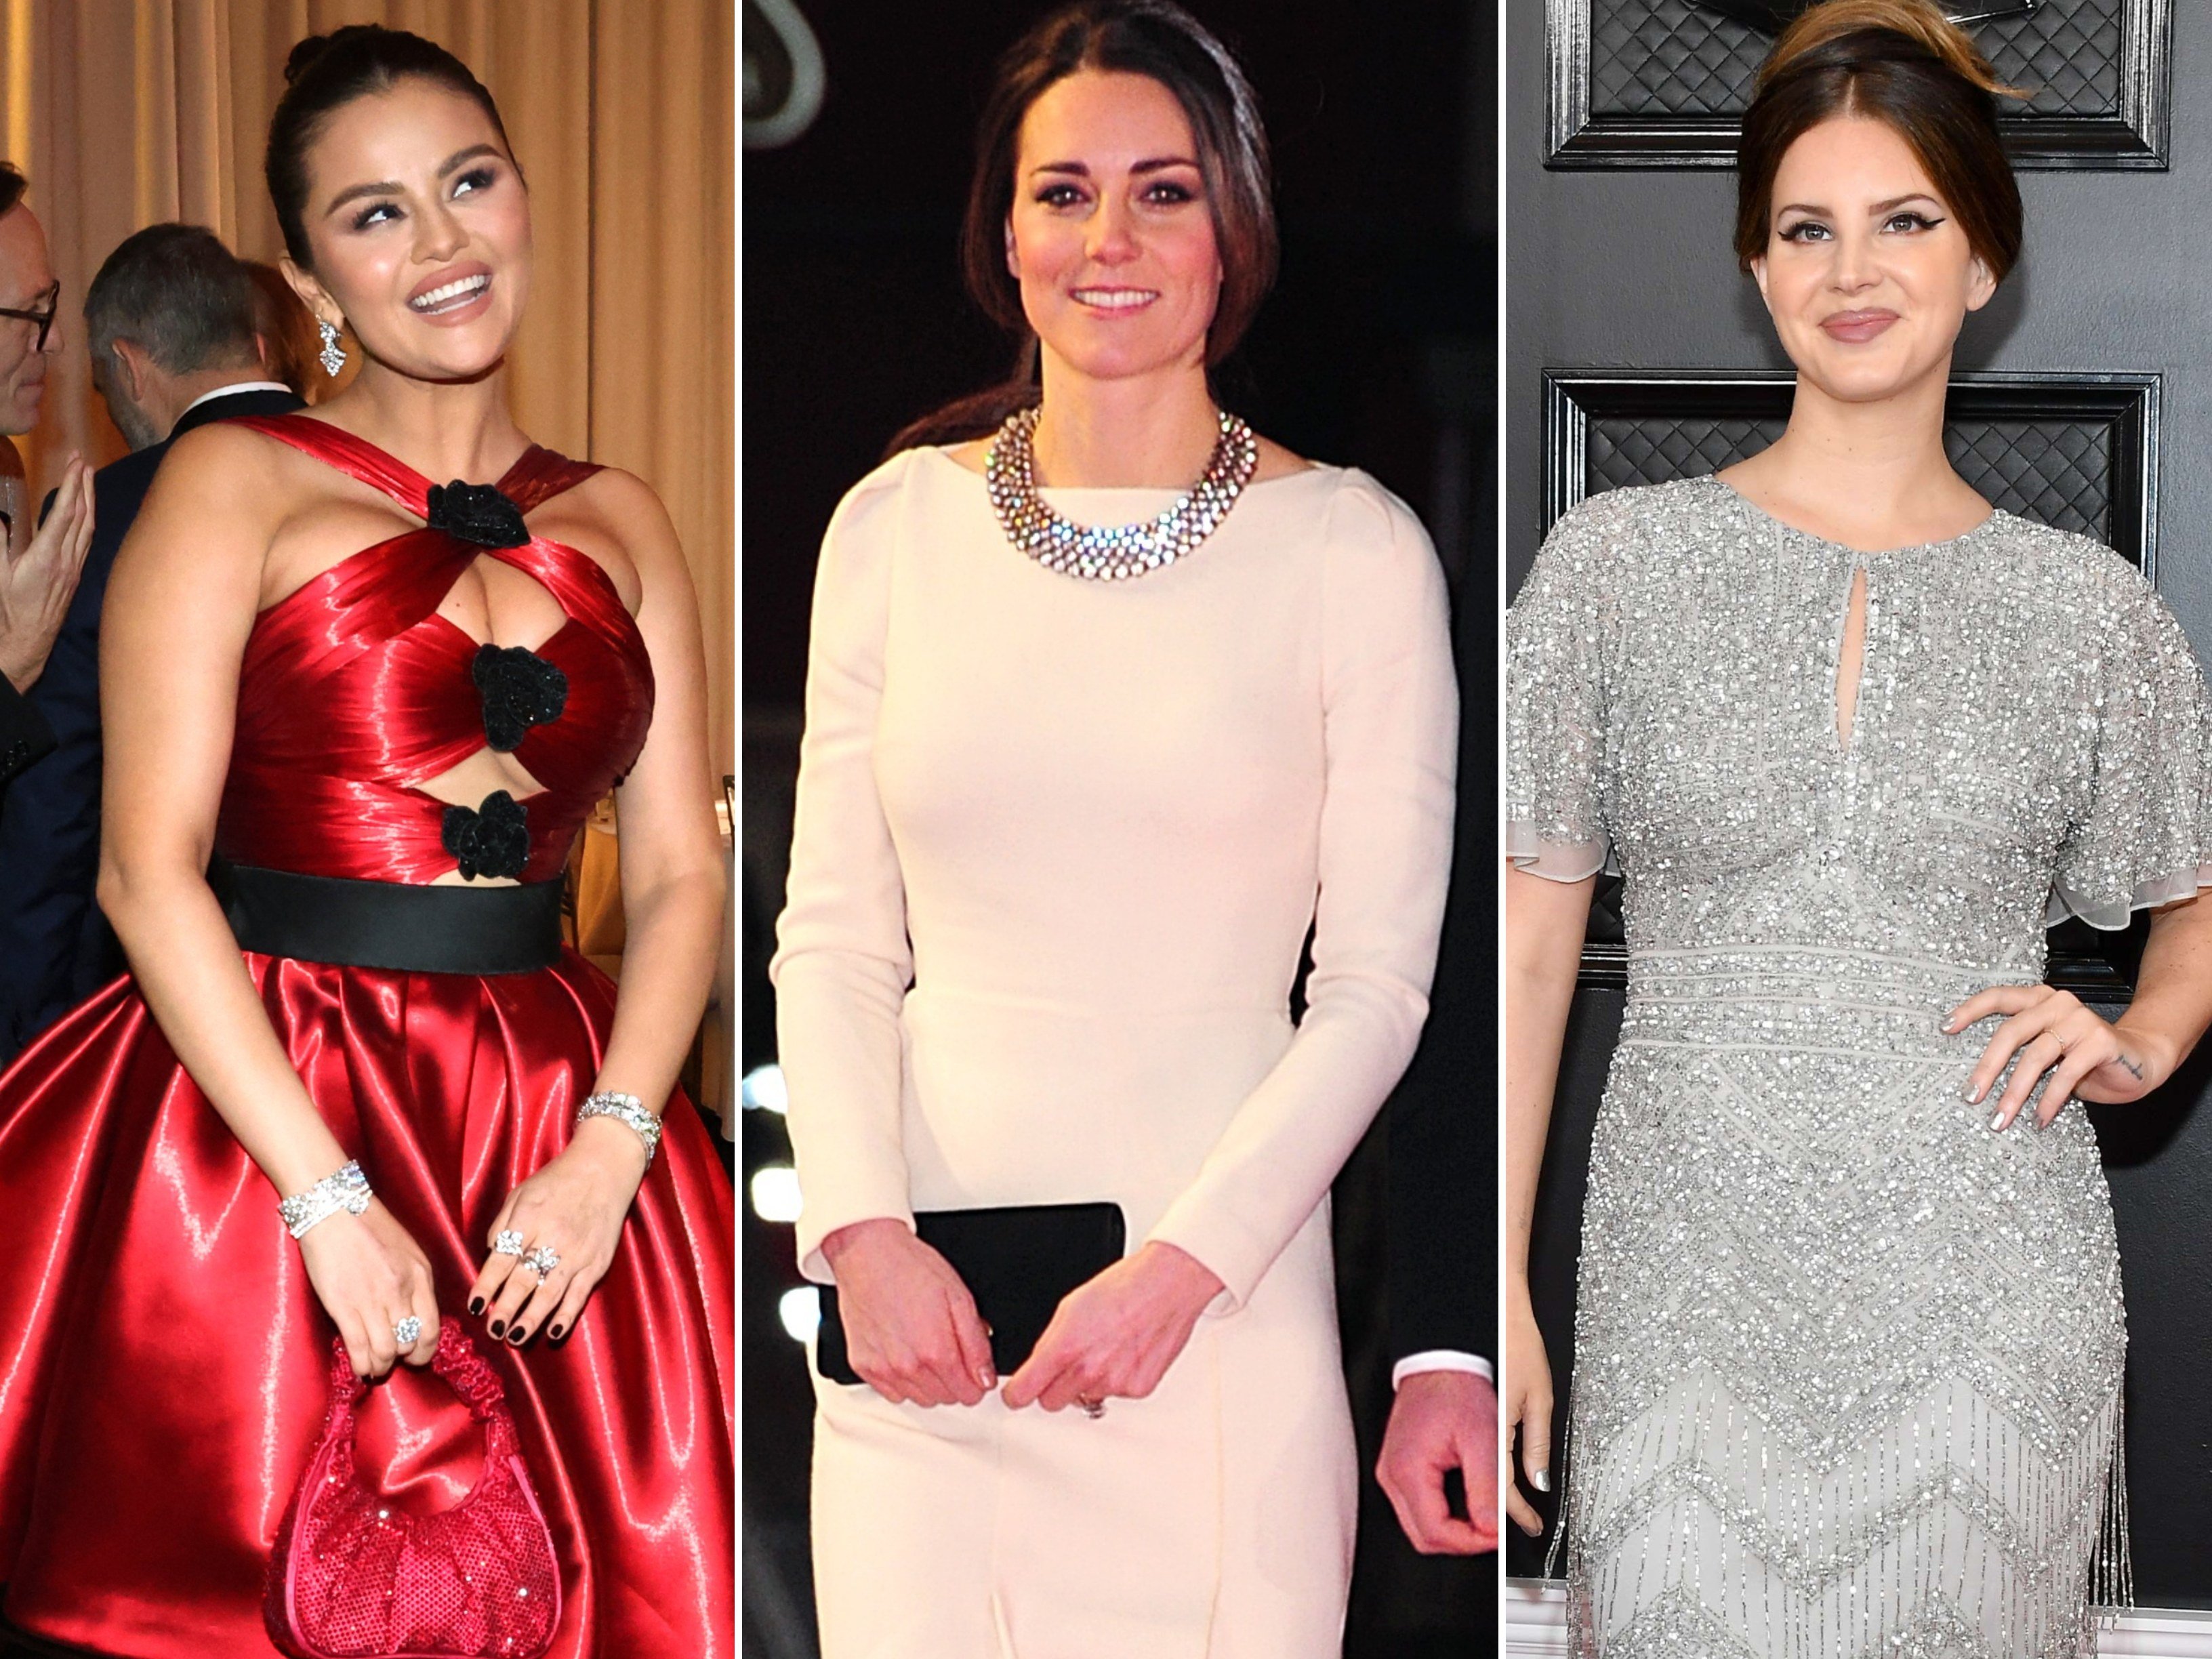 From Selena Gomez to Kate Middleton and Lana Del Rey, here are seven times celebrities have embraced low-cost styles. Photo: Getty, Reuters, AFP